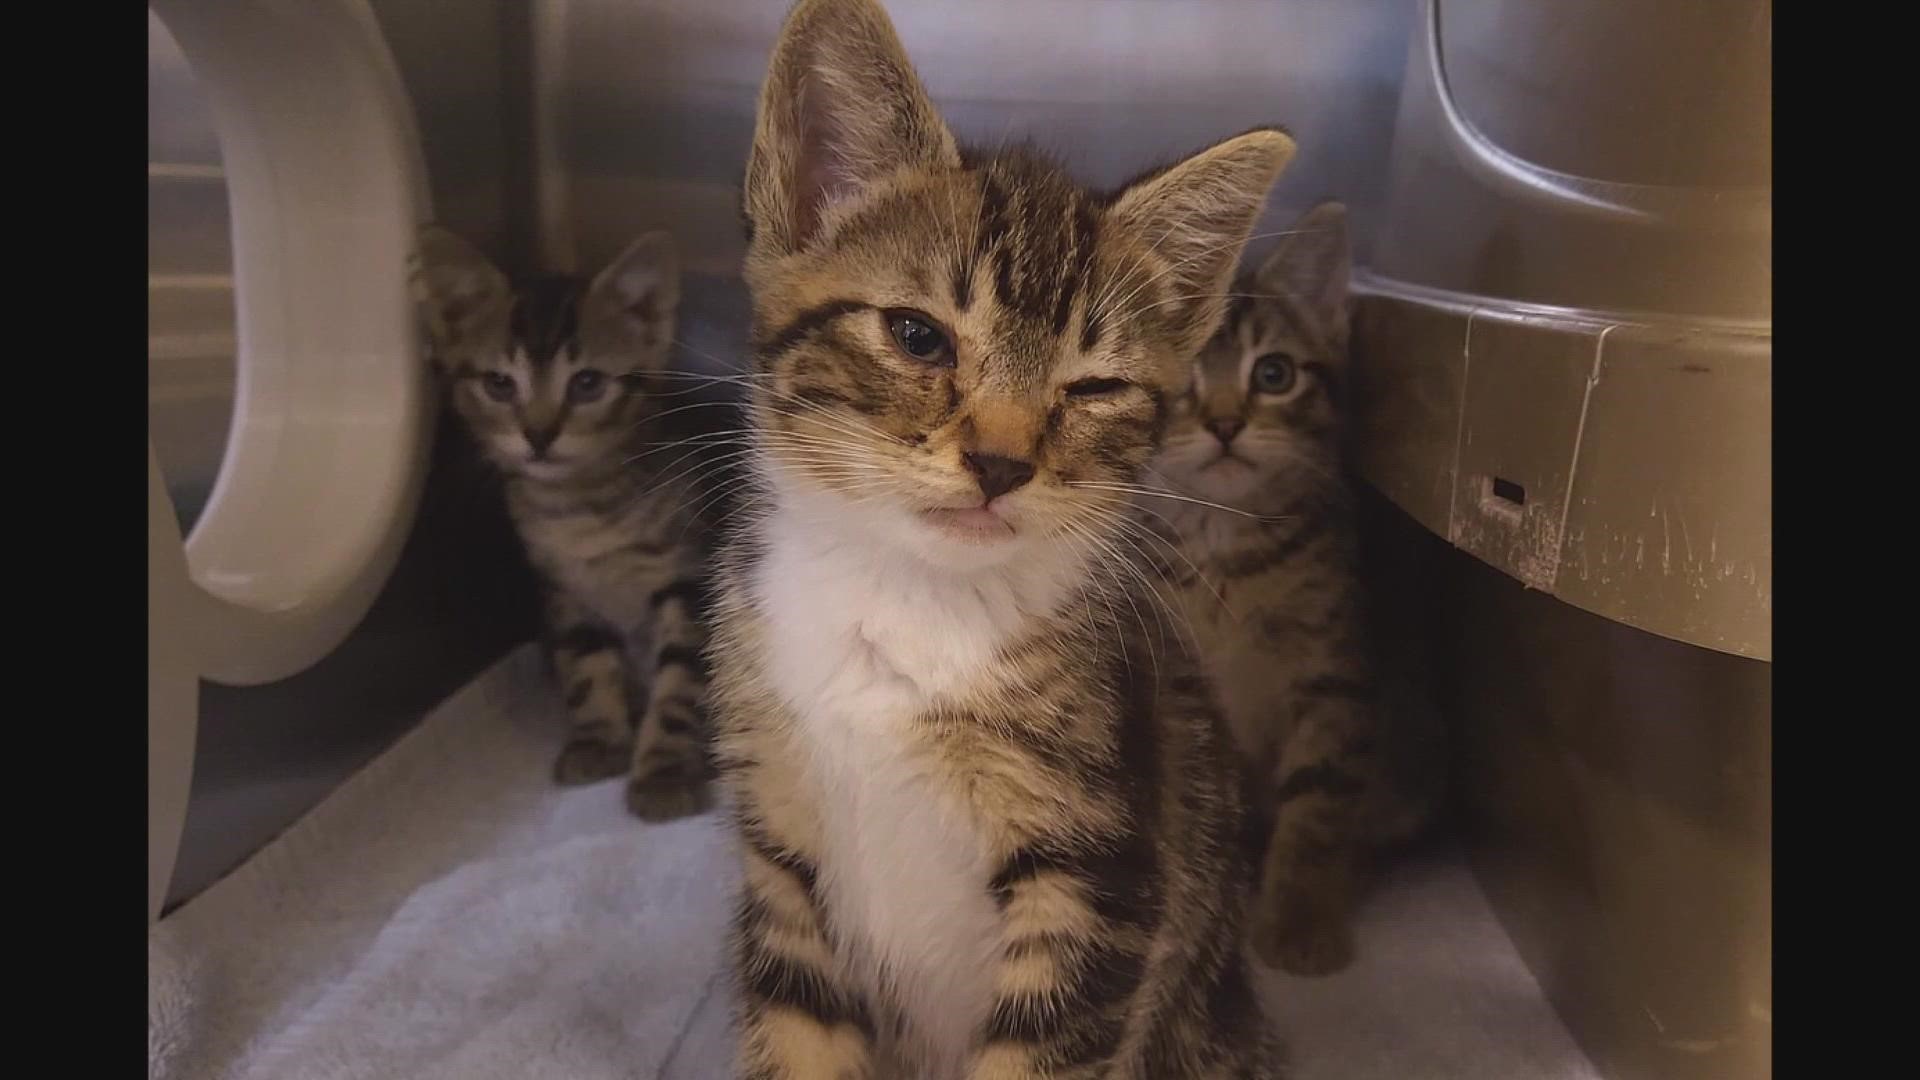 A pickup truck dumped a plastic container with four sick kittens inside into the parking lot of the shelter. The kittens are all under medical care at the shelter.